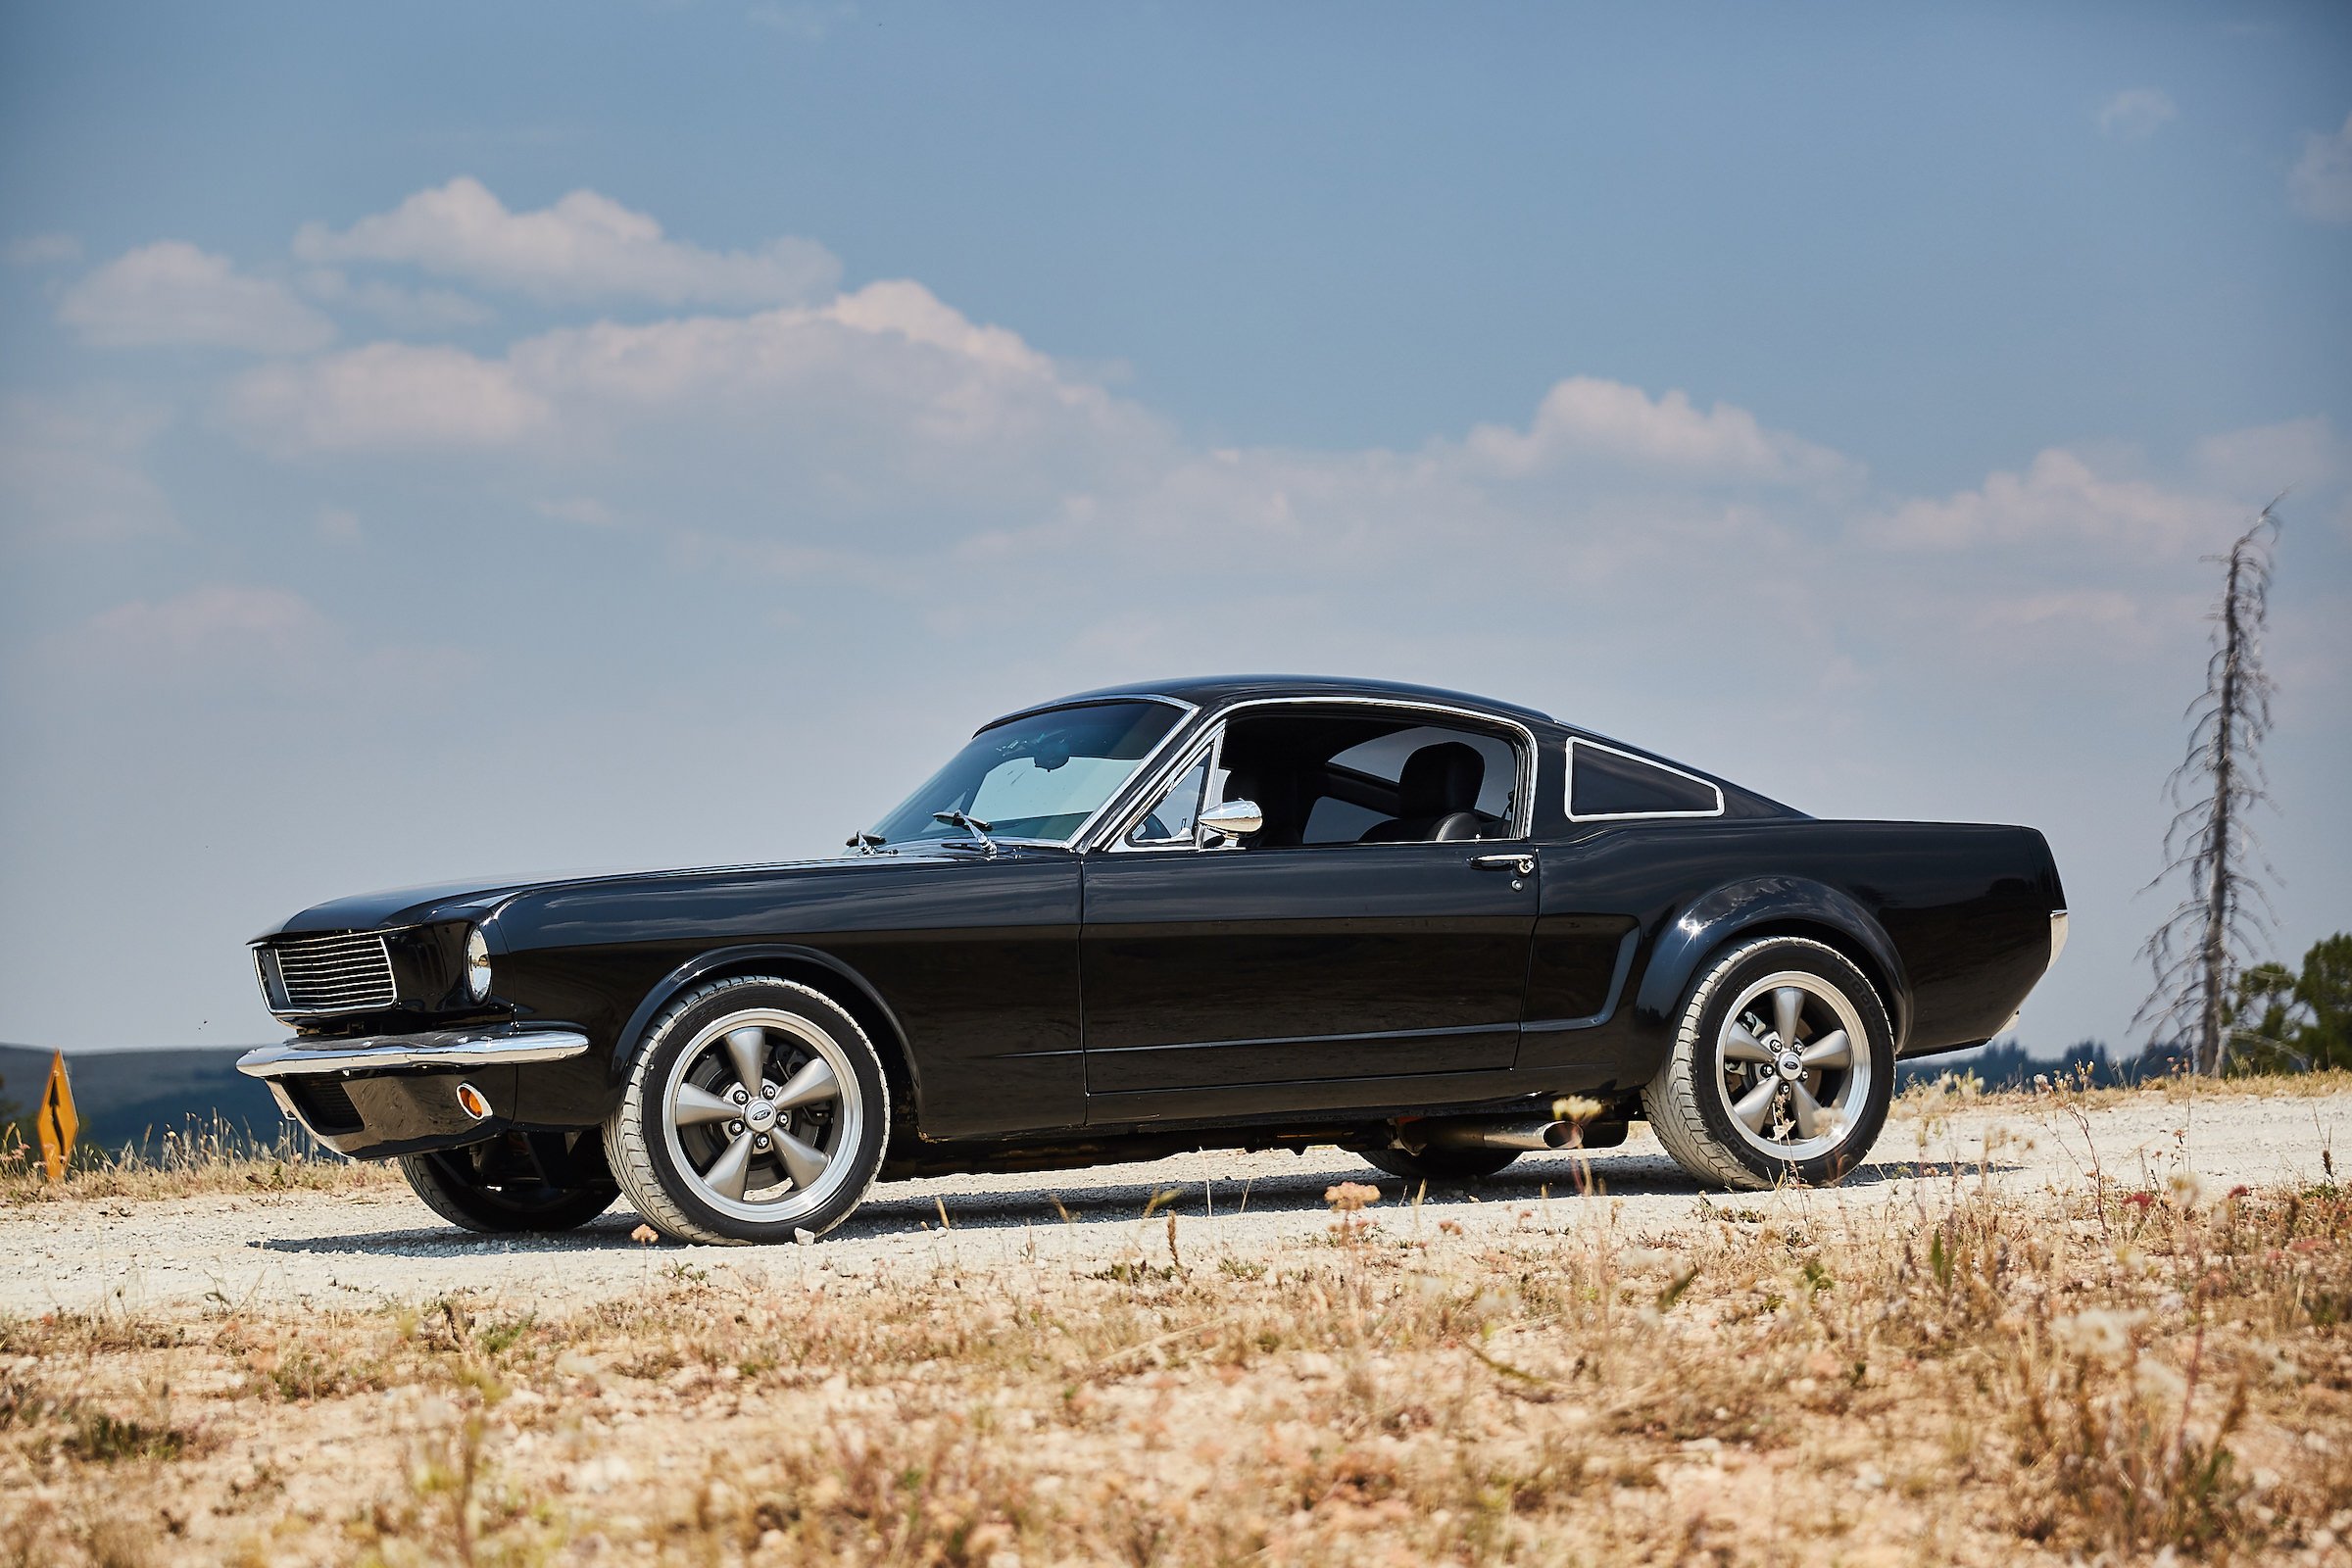 1965 Mustang Fastback For Sale Near Me